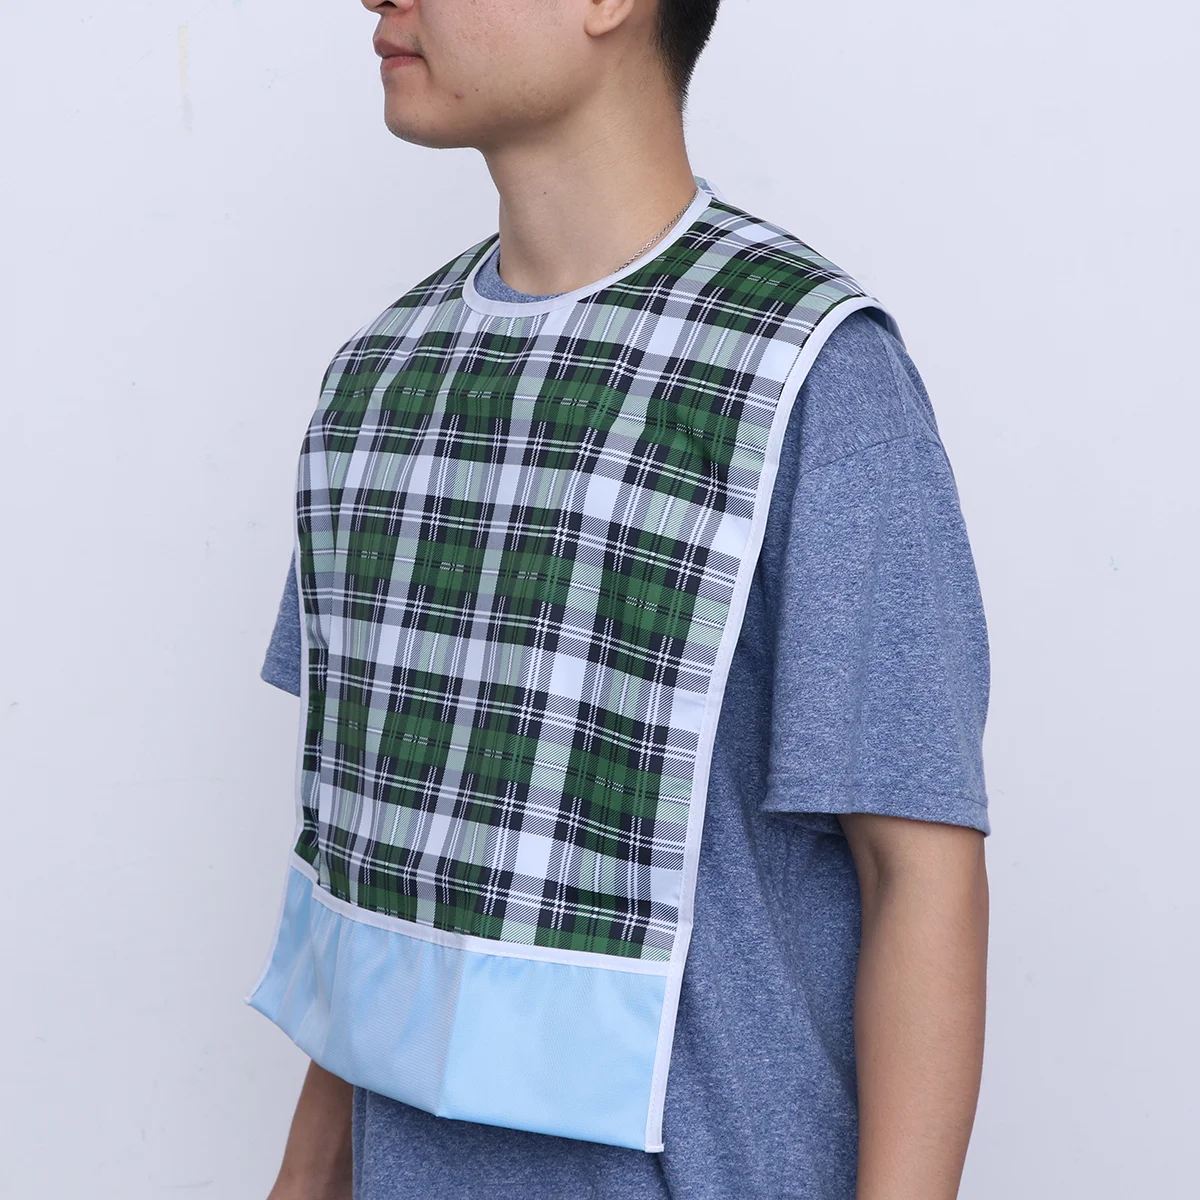 

Adult Mealtime Protector Waterproof Pocket Bib Disability Aid Apron Washable with Crumb Catcher (Green Grid)